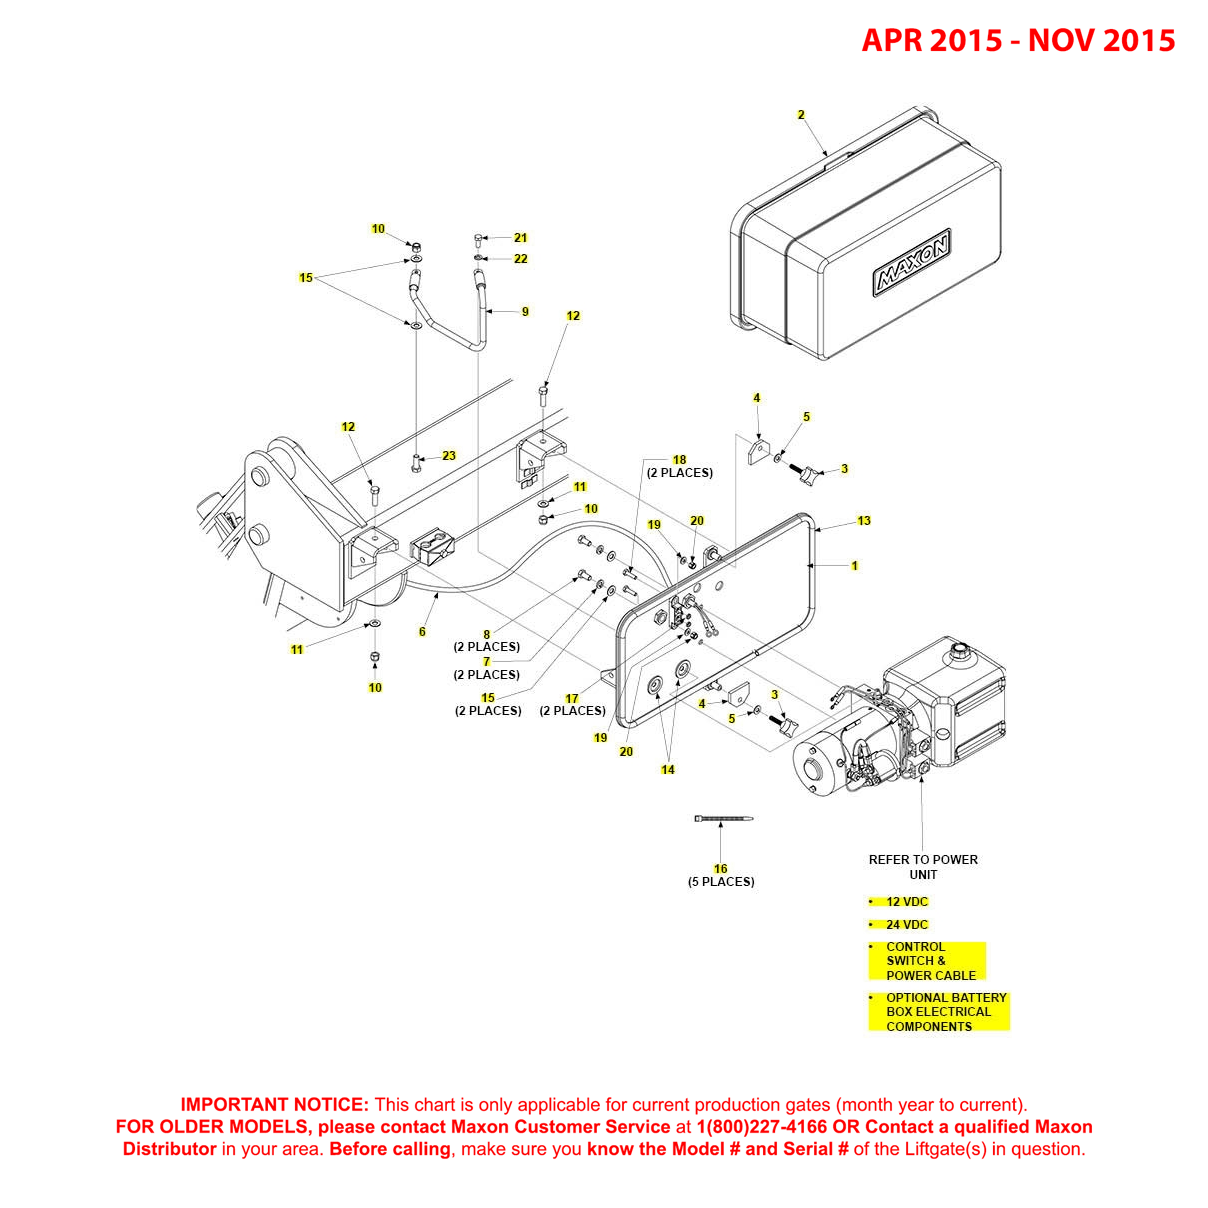 Maxon GPTWR (Apr 2015 - Nov 2015) Pump Cover And Mounting Plate Assembly Diagram